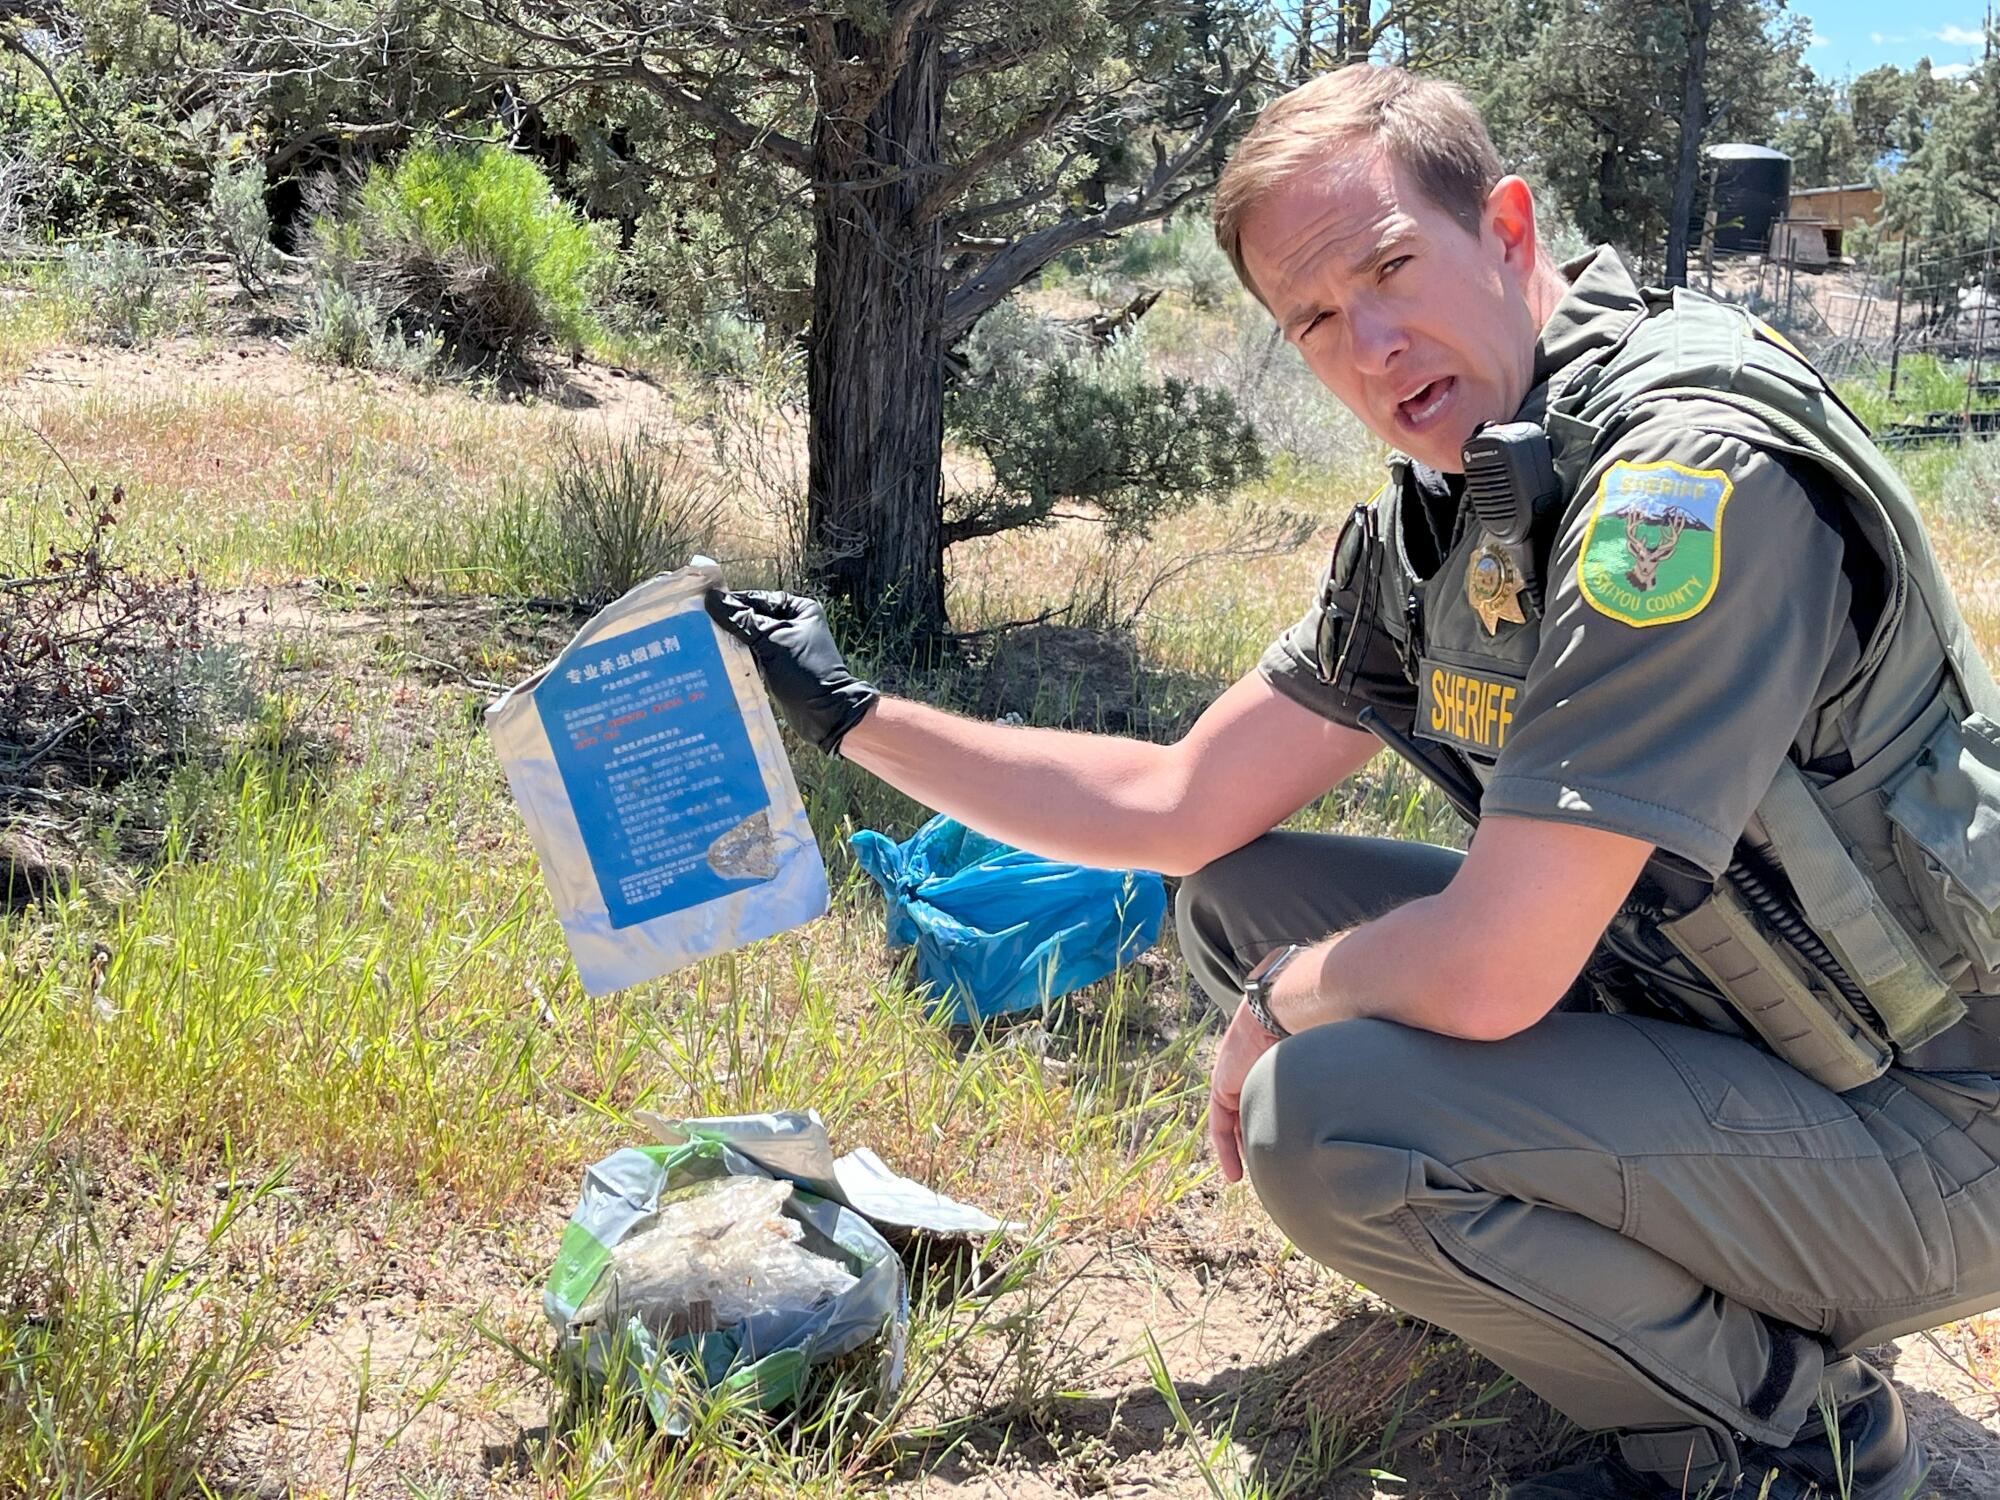 Siskiyou County Sheriff Jeremiah LaRue inspects Chinese-labeled pesticides found stashed in a tree.